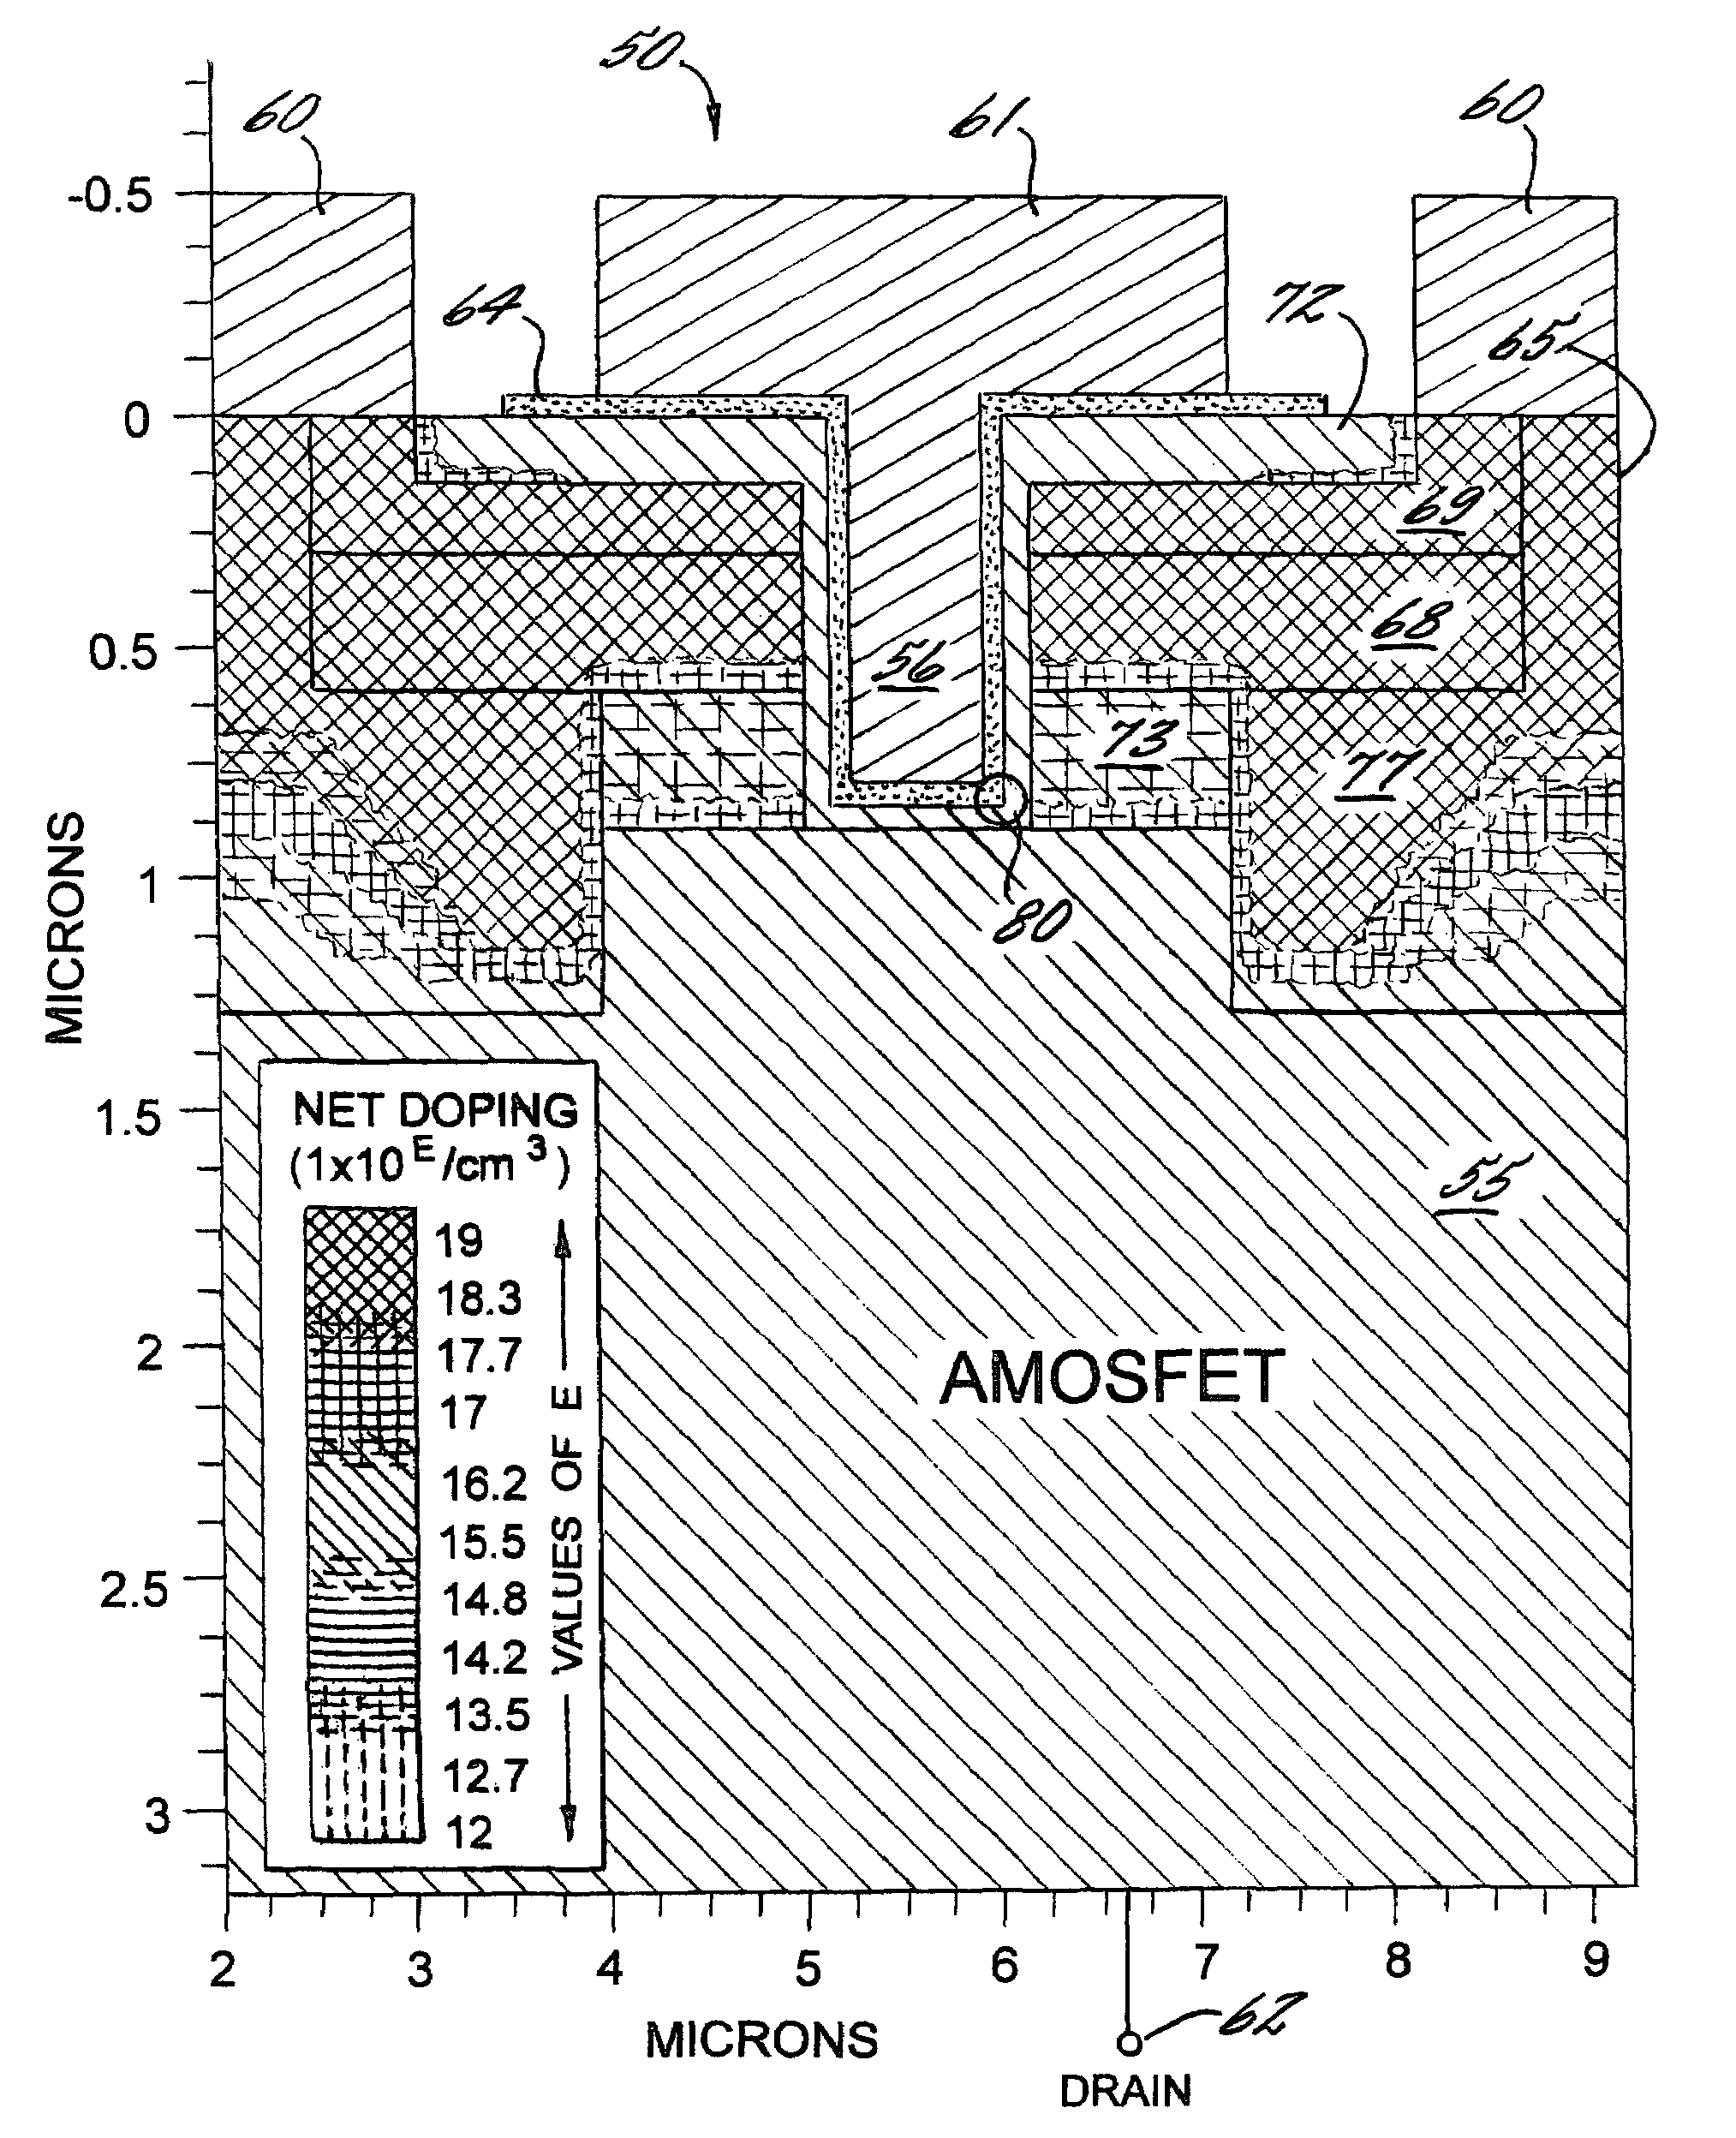 Transistor with A-face conductive channel and trench protecting well region